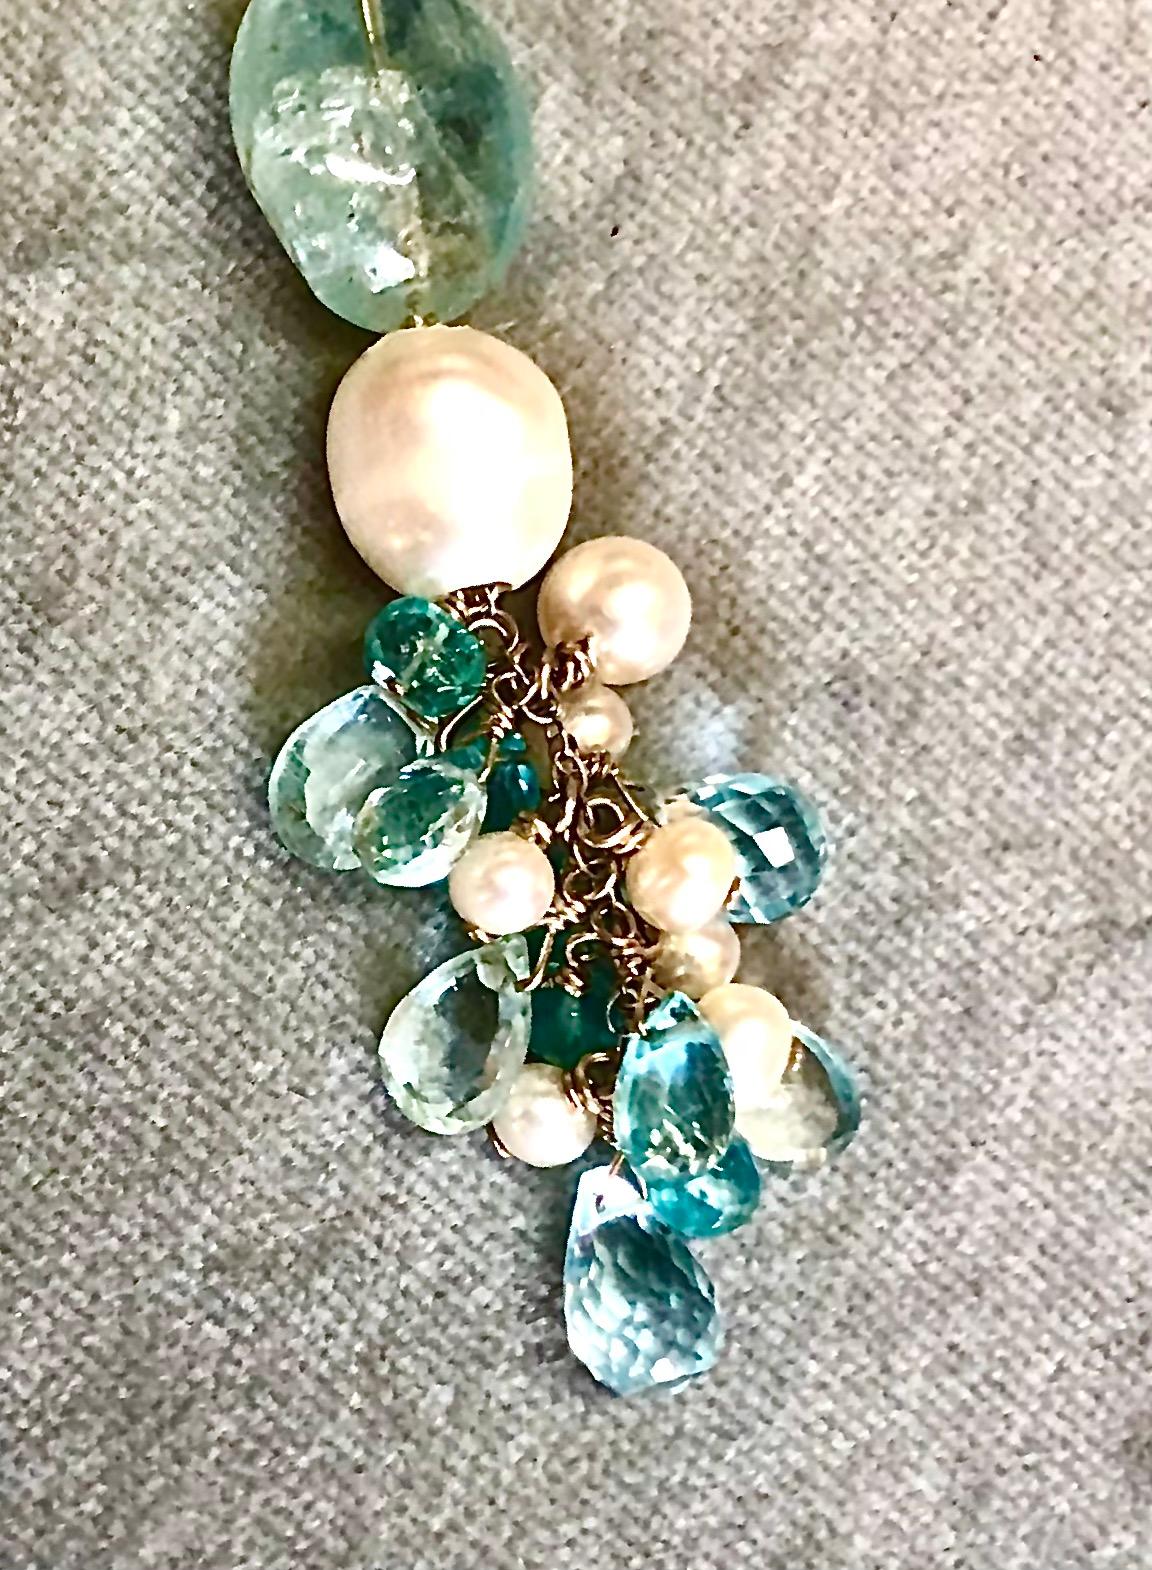 Pair of aquamarine earrings with white freshwater pearls and 14kt white gold In New Condition For Sale In New Orleans, LA